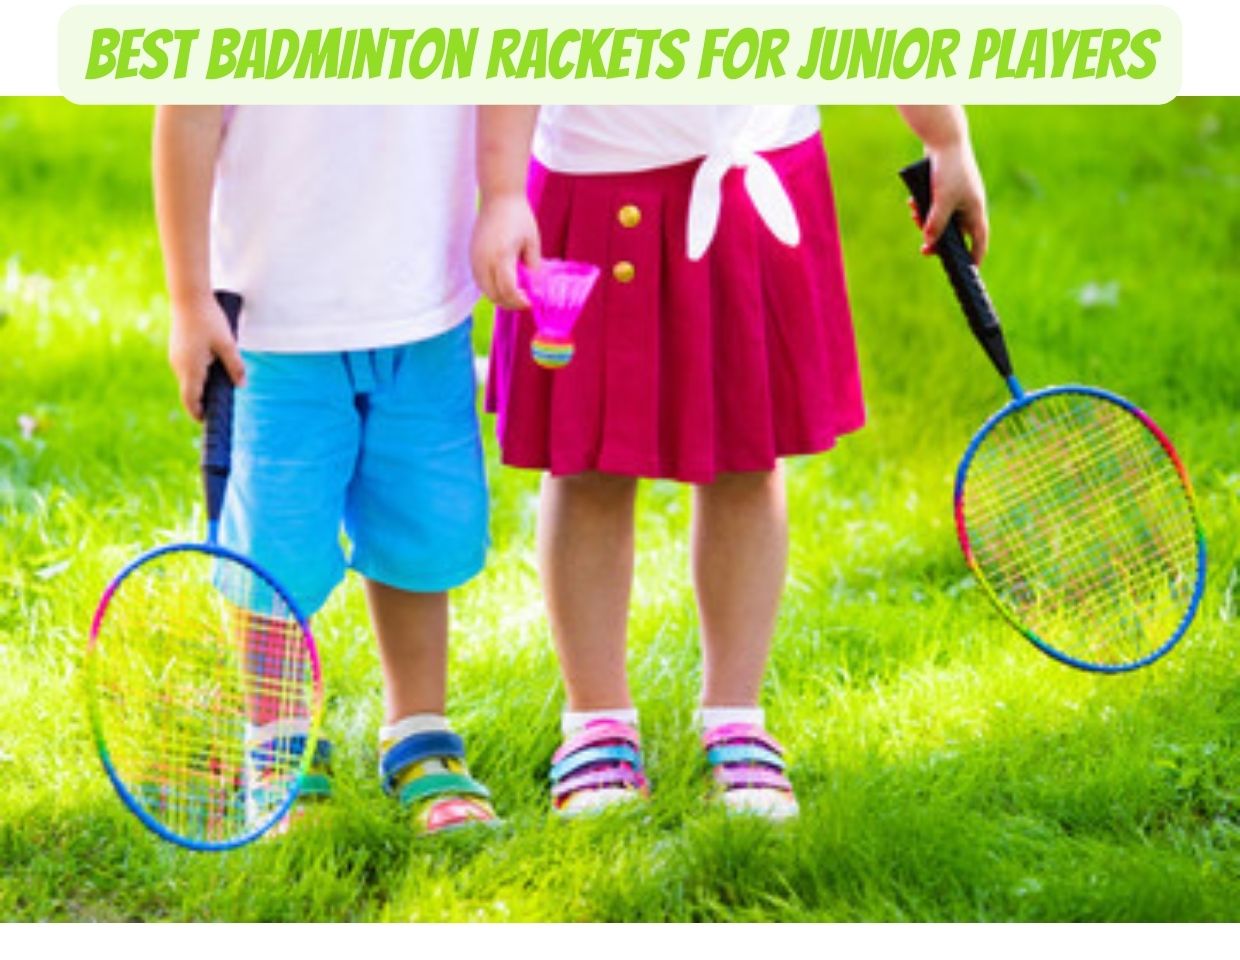 Best Badminton Rackets for Junior Players